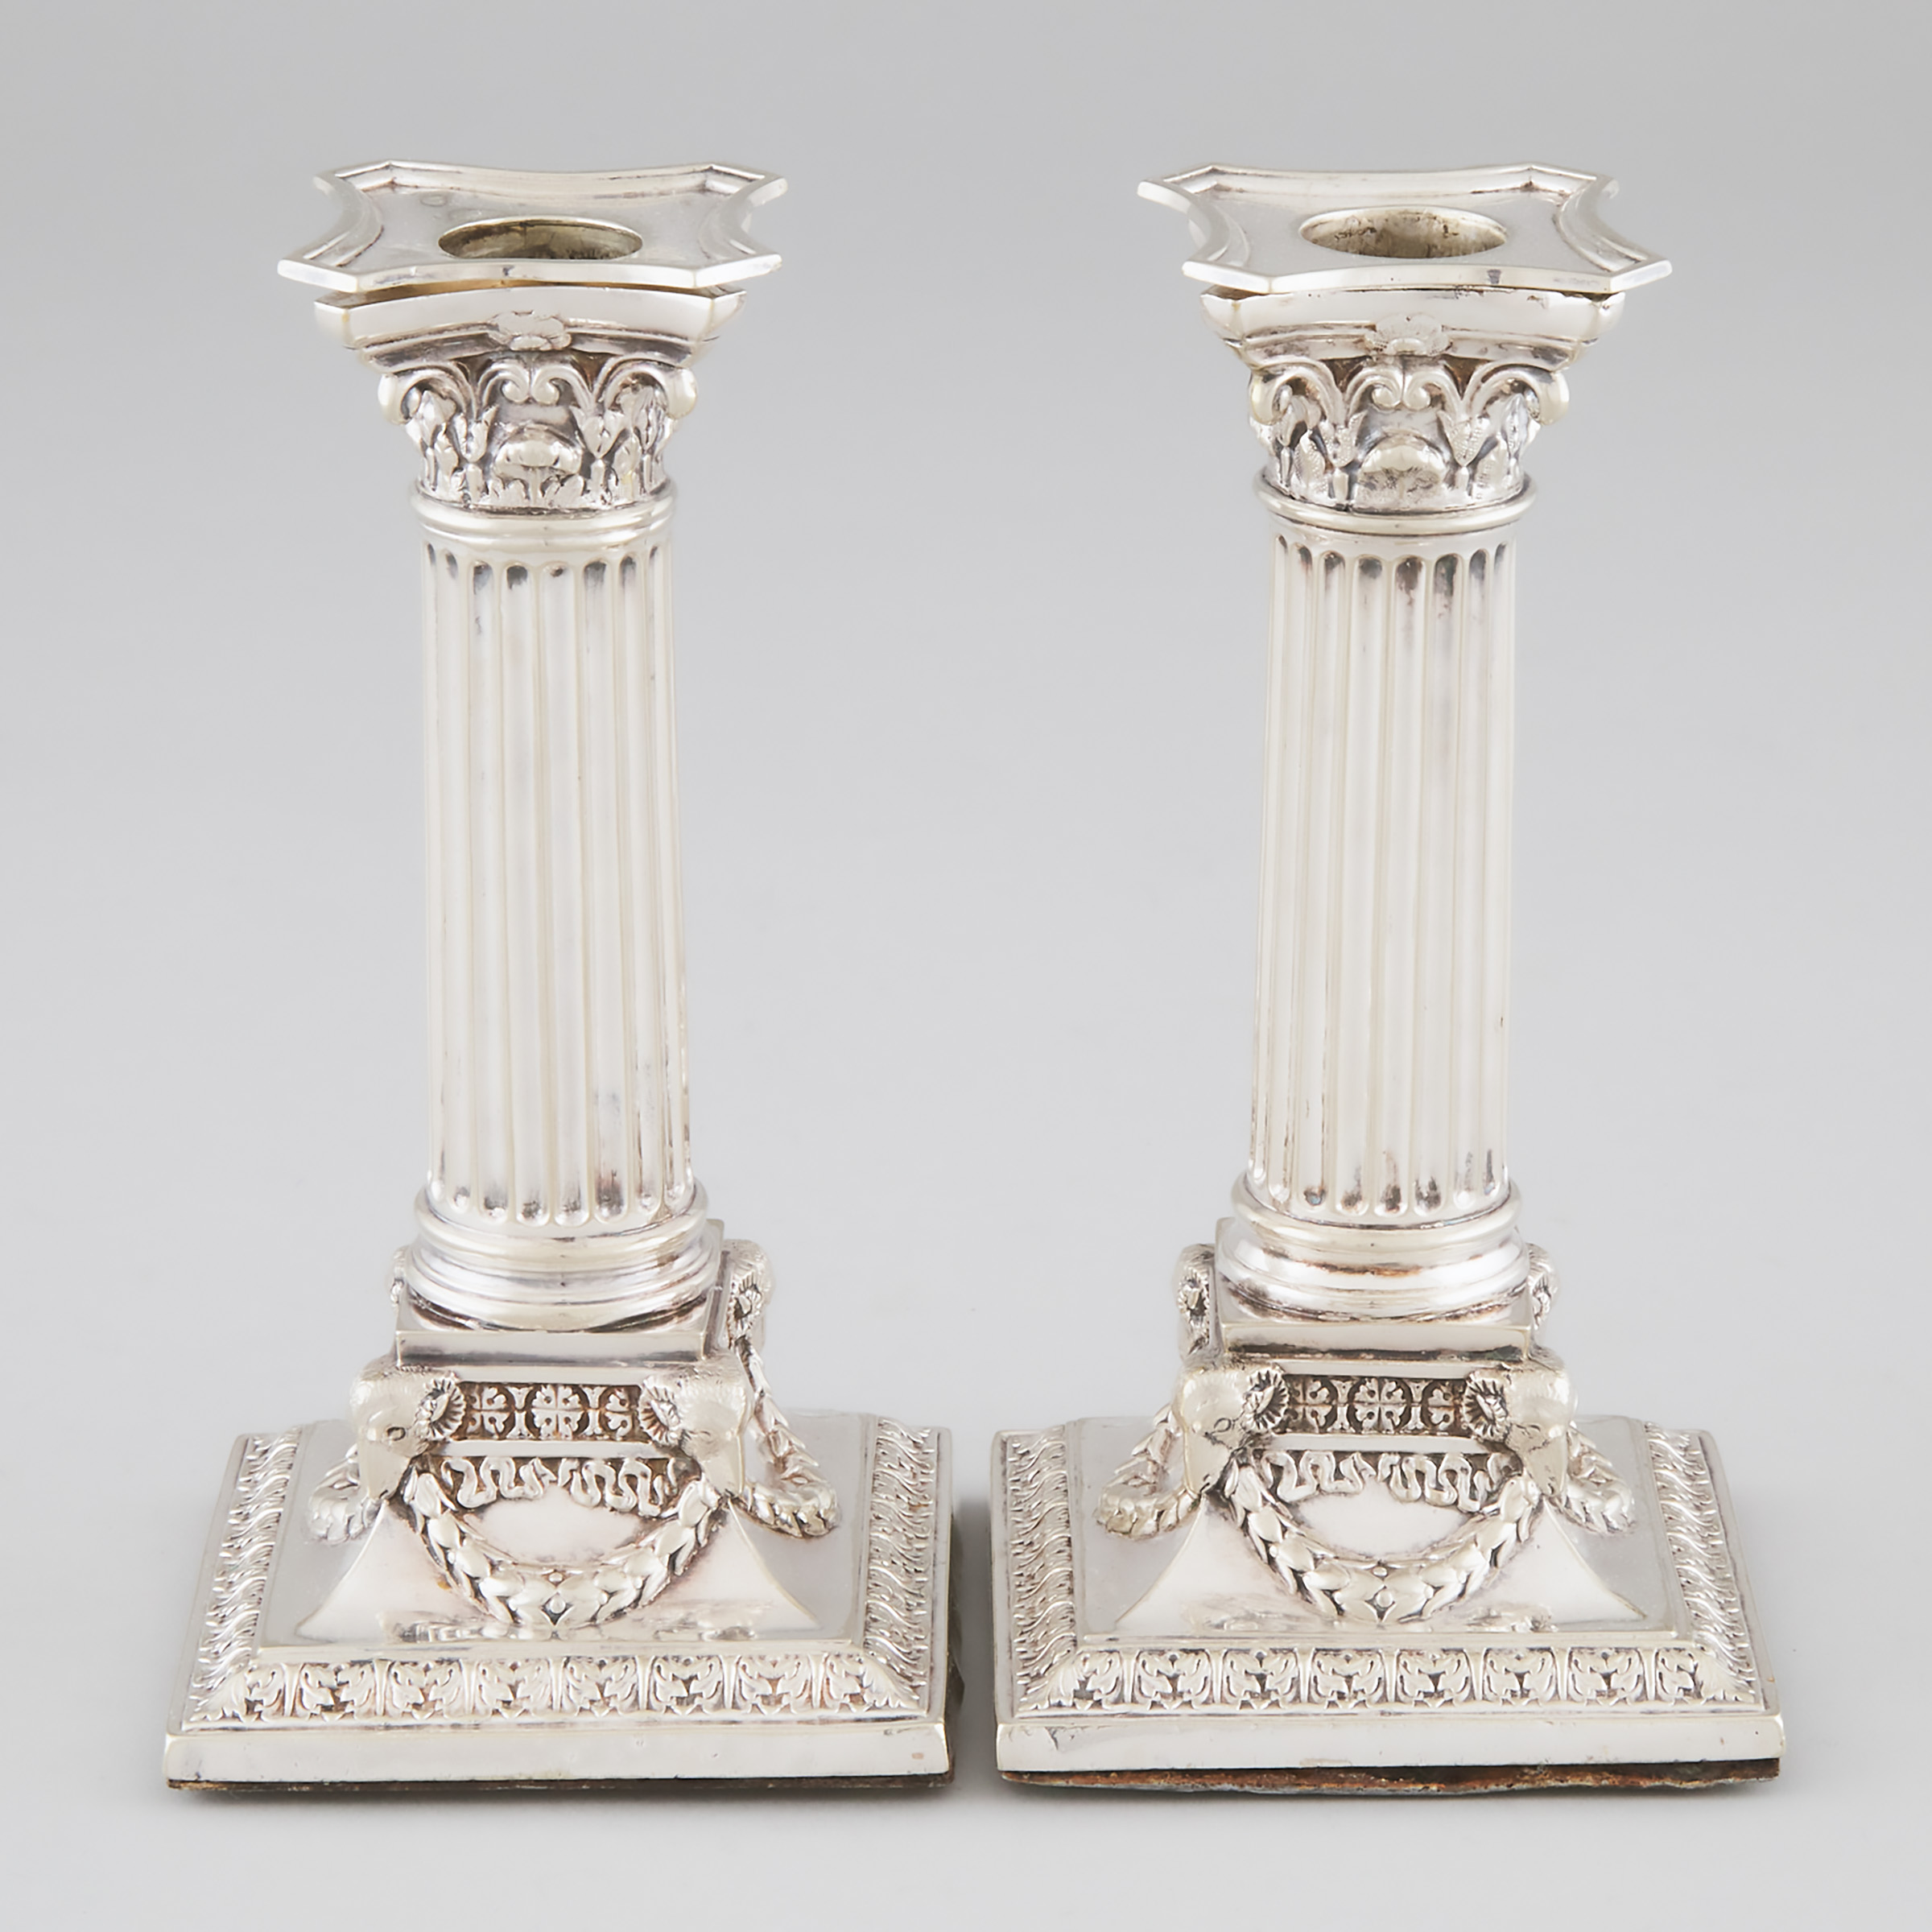 Pair of Victorian Silver Plated Table Candlesticks, late 19th century